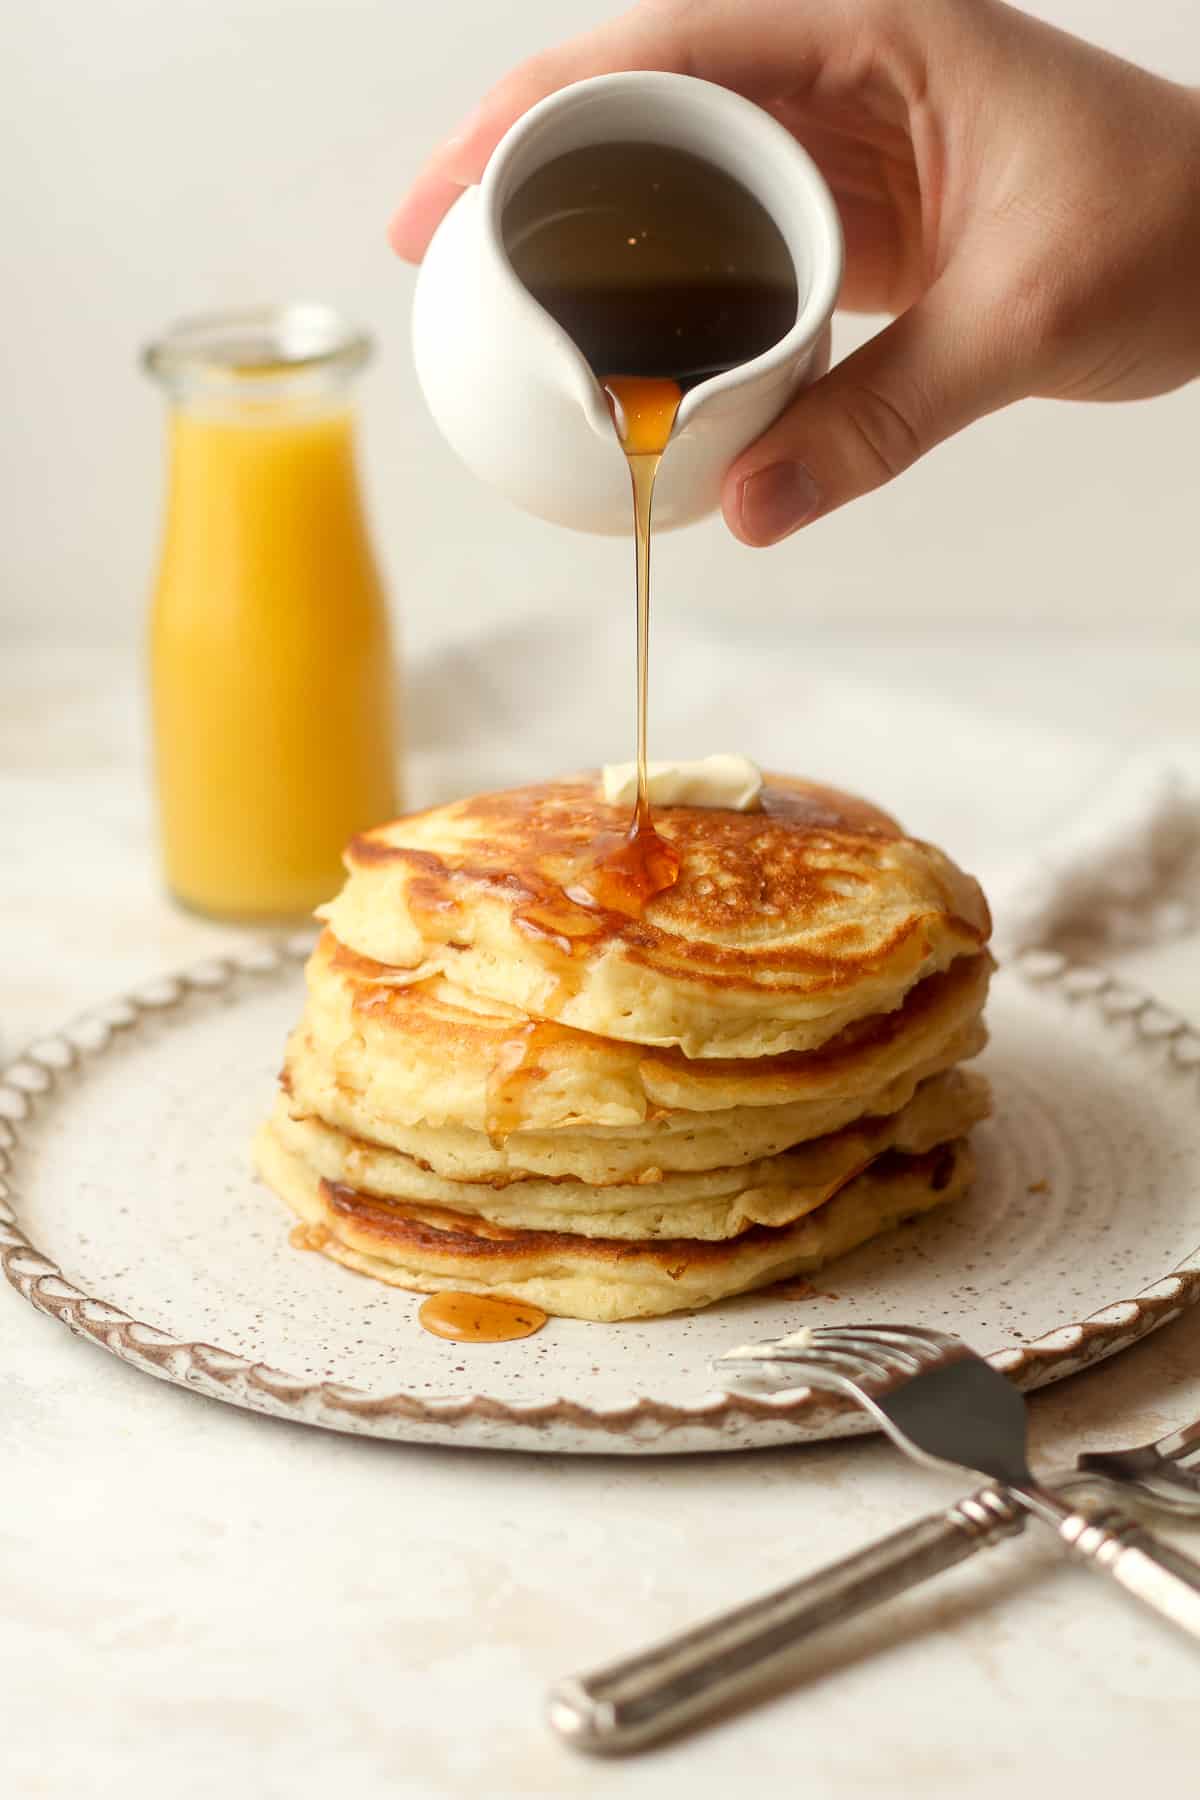 A hand pouring syrup over a stack of buttermilk pancakes.